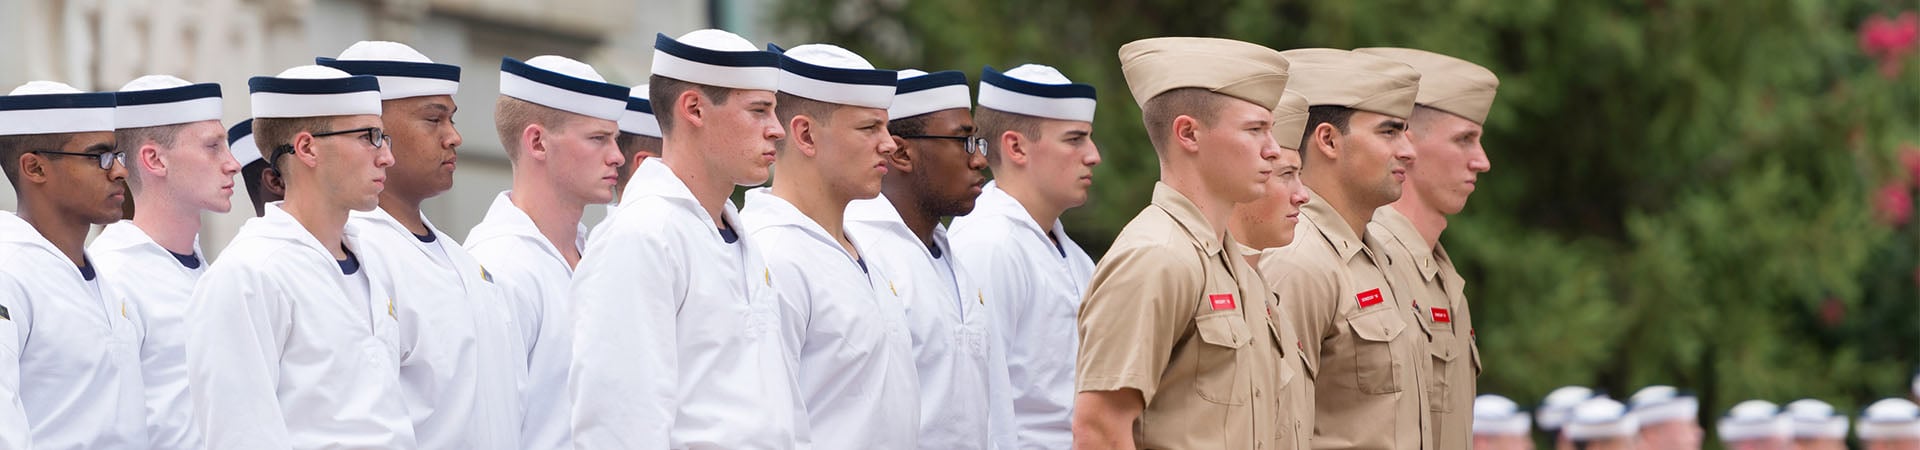 Improving Operational Efficiency with the United States Naval Academy Midshipmen Summer Travel Program